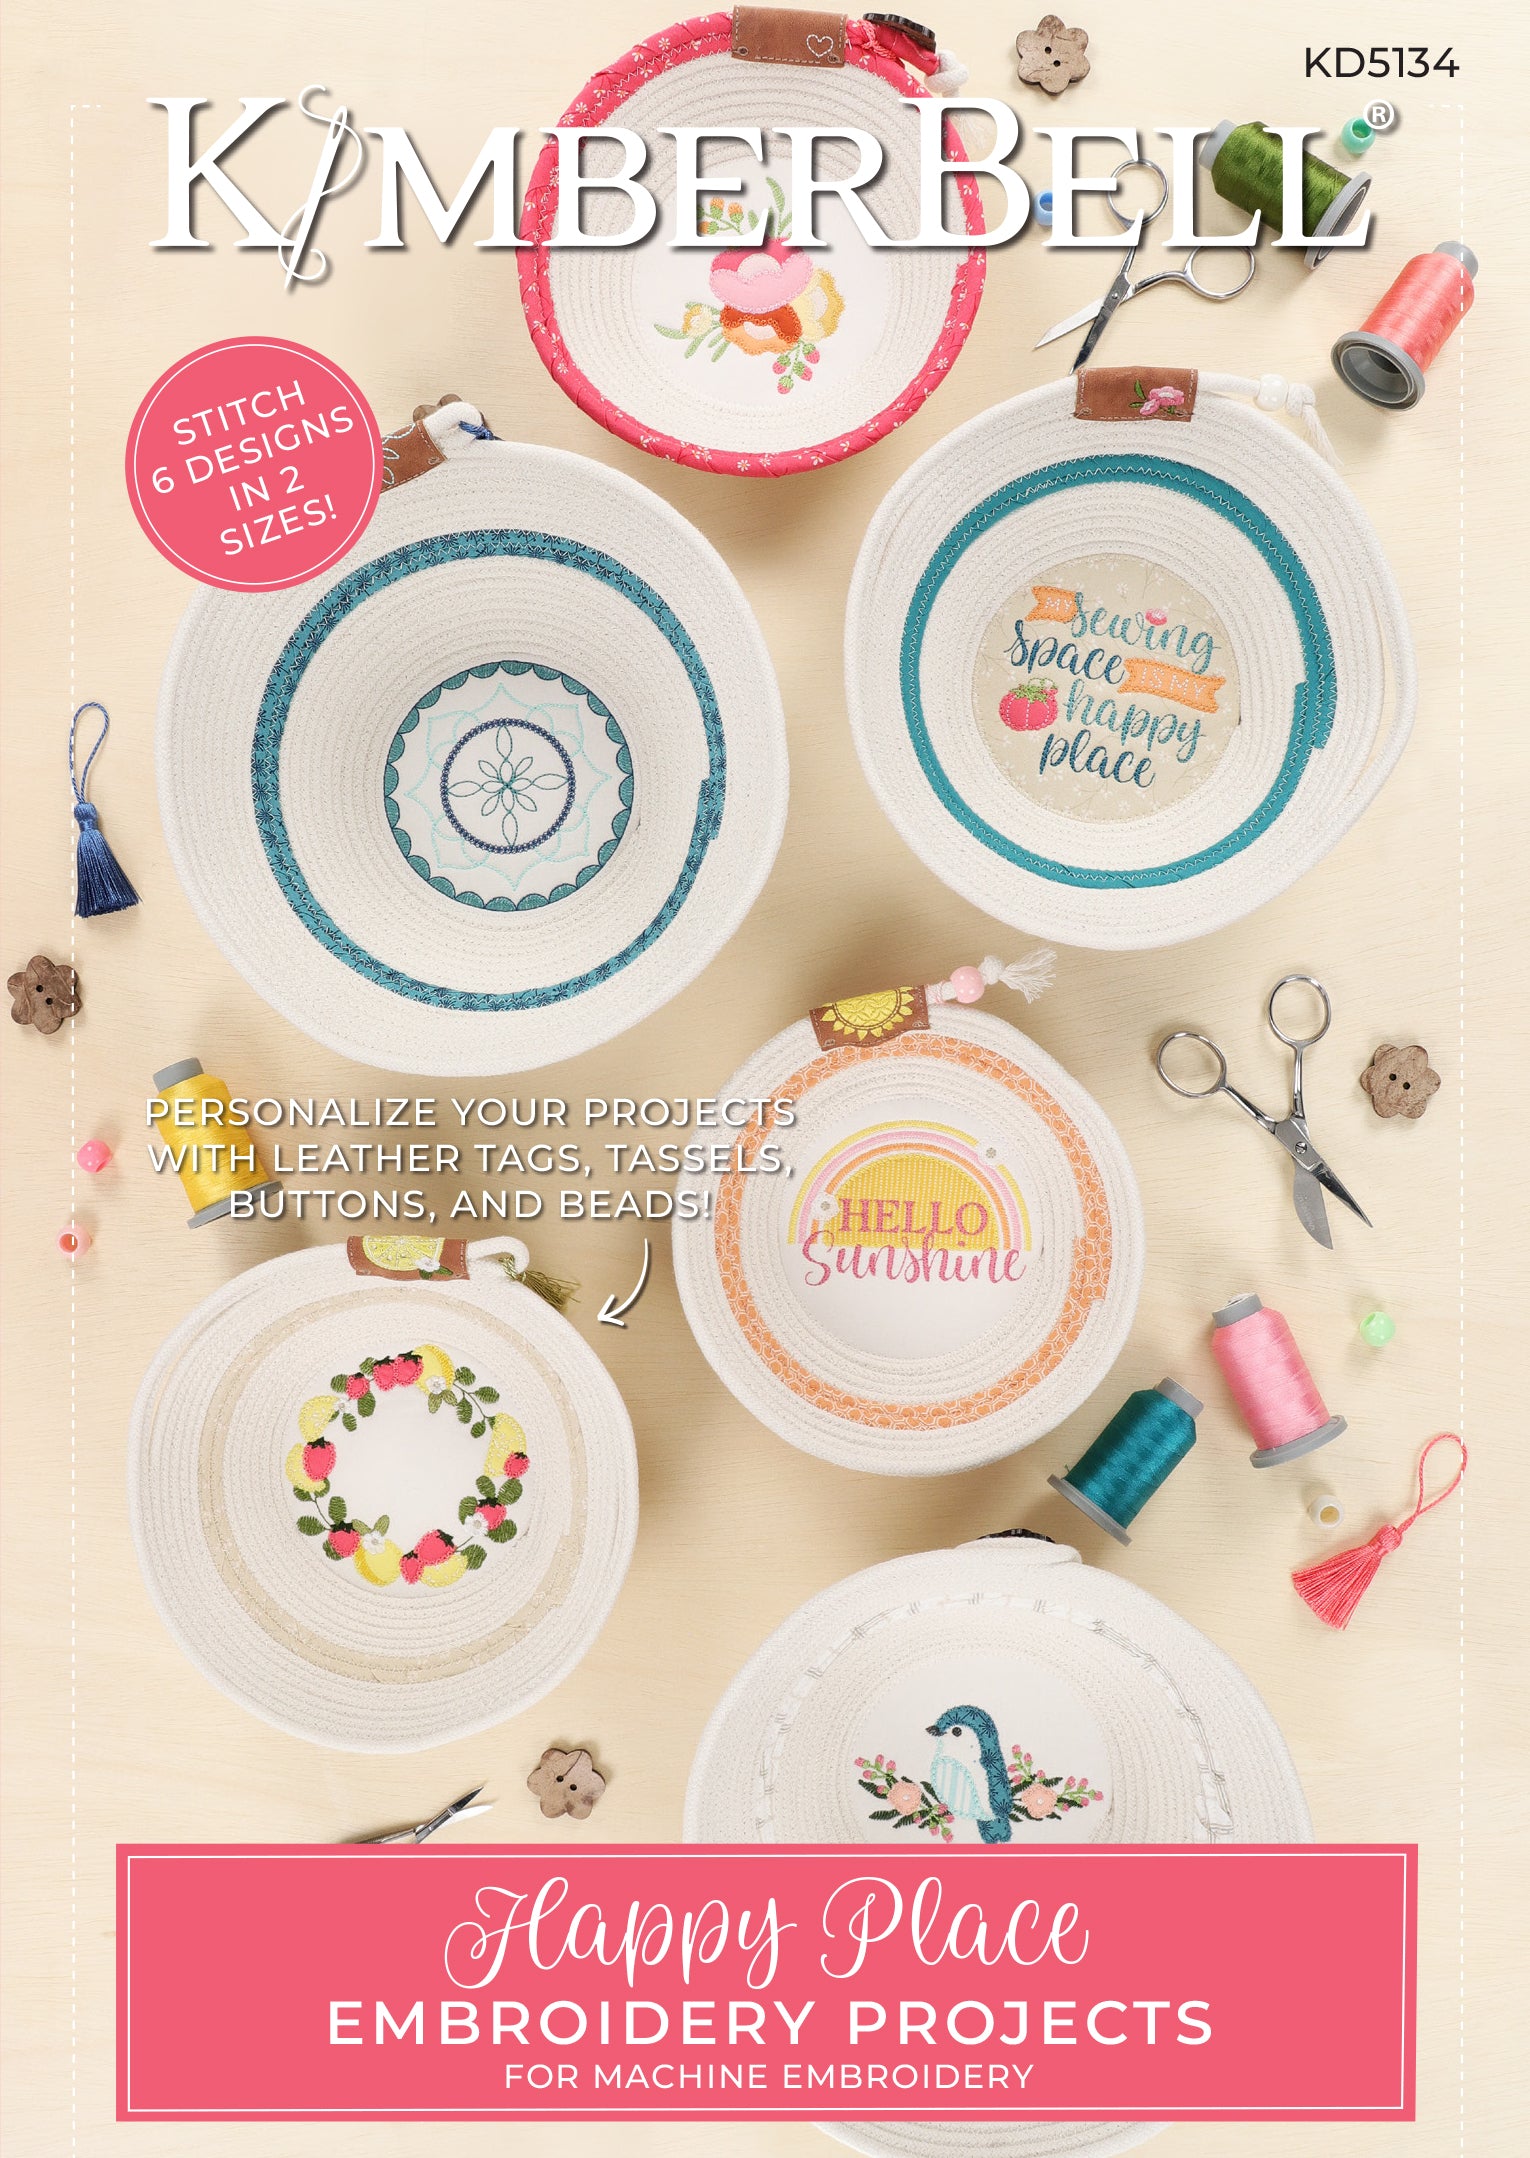 With Kimberbell’s Happy Place Embroidery Projects (KD5134), create rope bowls with 6 unique designs in multiple sizes. The photo shows the front cover of the CD product with an example of each design.